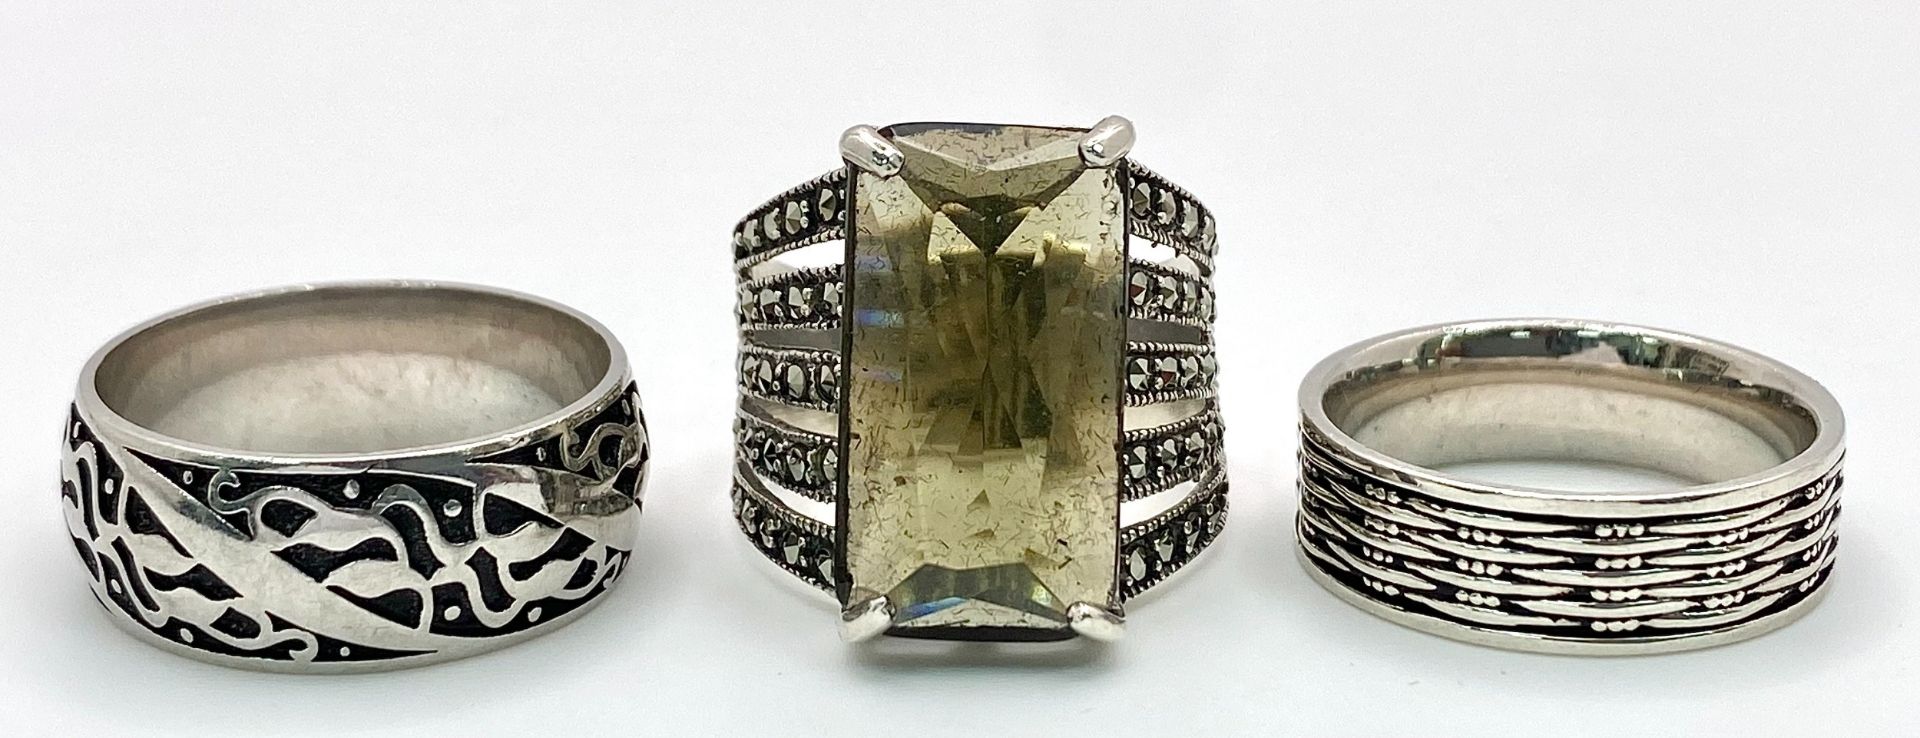 Three Different Style 925 Silver Rings. Sizes: 2 x R, 1 x U.